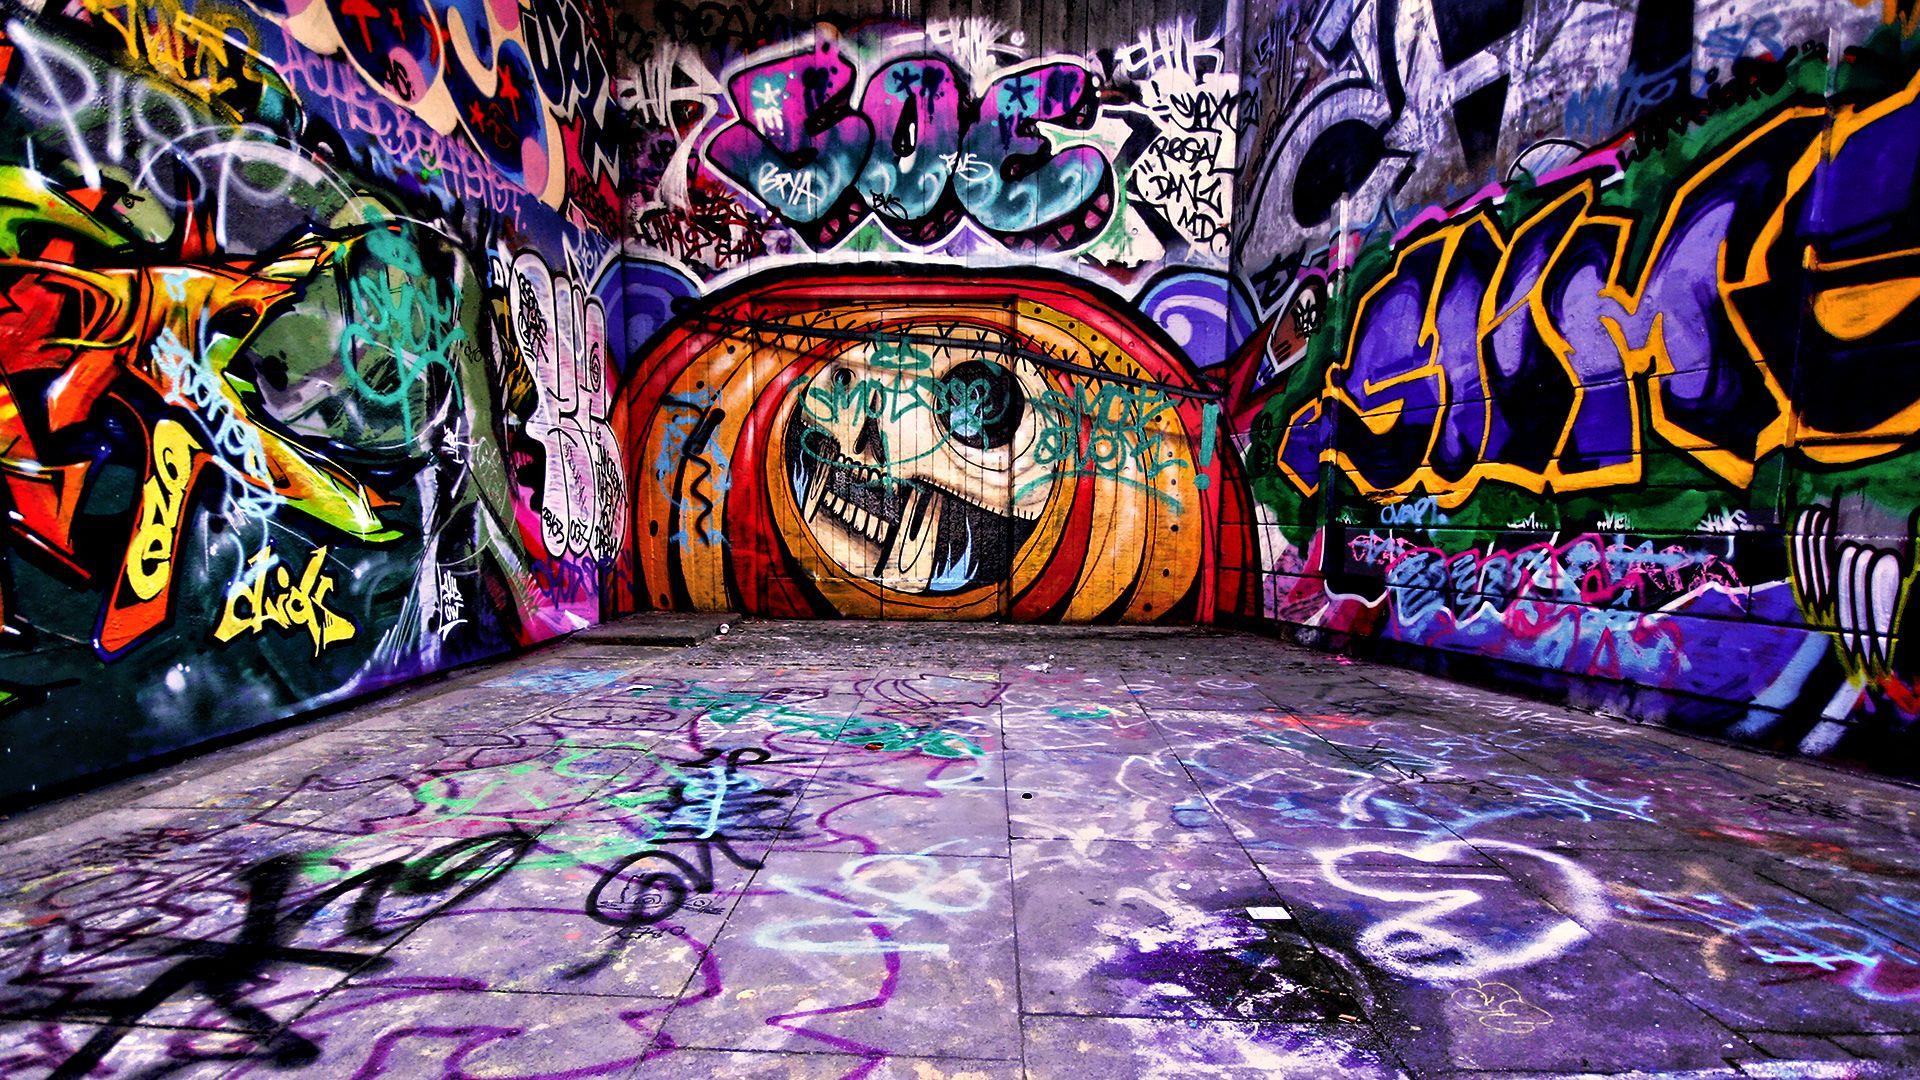 Graffiti: Art, Vandalism, or Both?. What I am Curious About